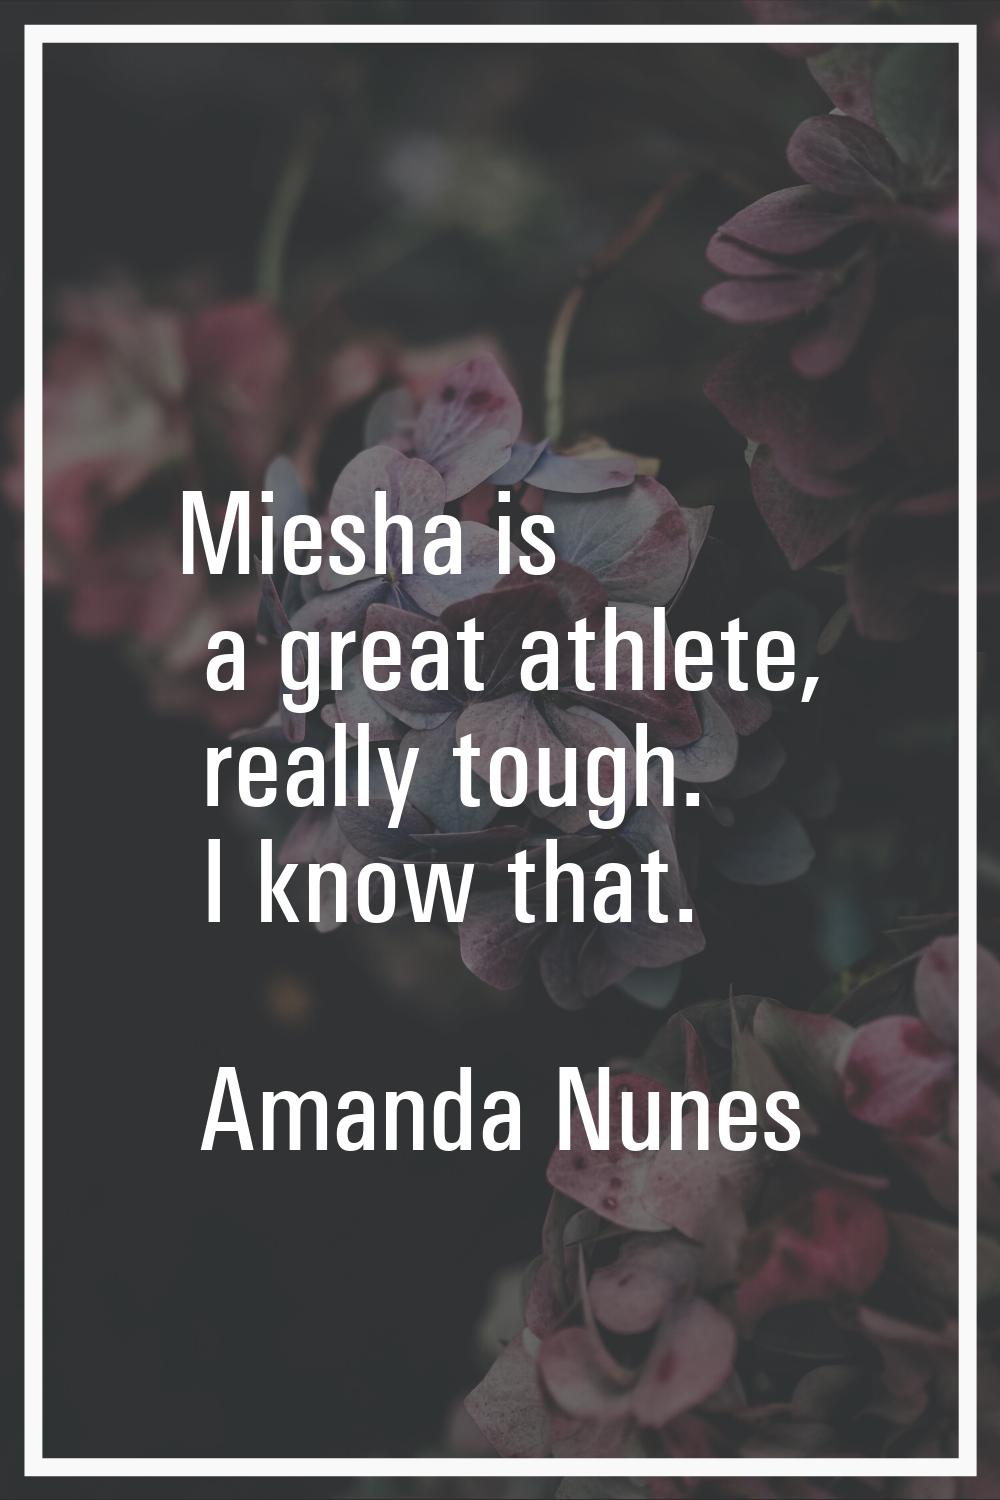 Miesha is a great athlete, really tough. I know that.